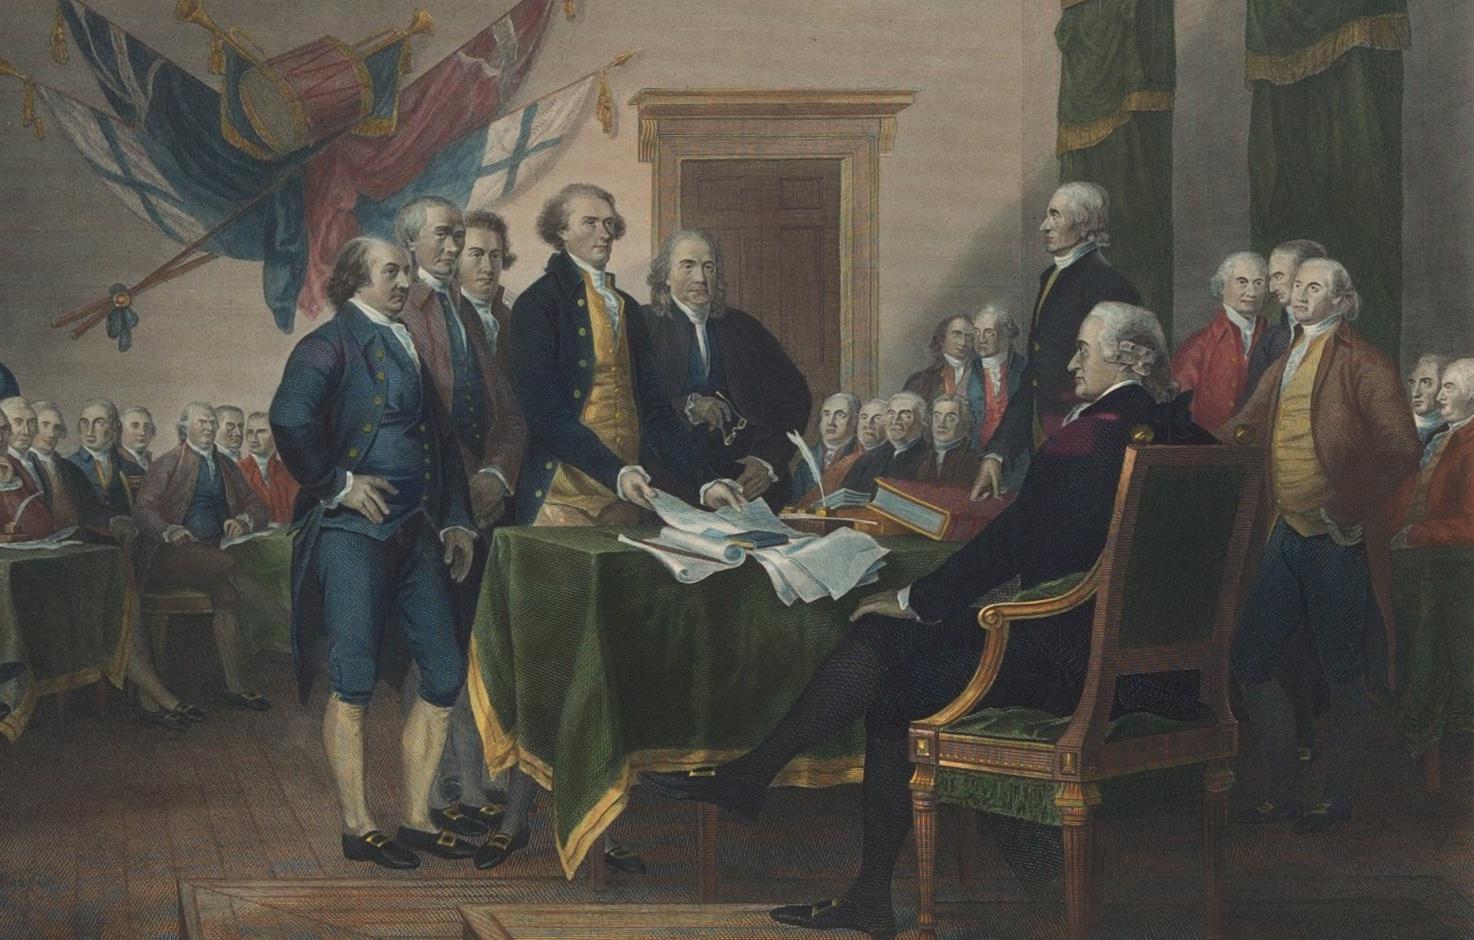 A beautiful impression of W. L. Ormsby’s late nineteenth century engraving of this historic scene, the signing of the Declaration of Independence. The engraving was produced for the Centennial of the signing of the Declaration. It is based on the